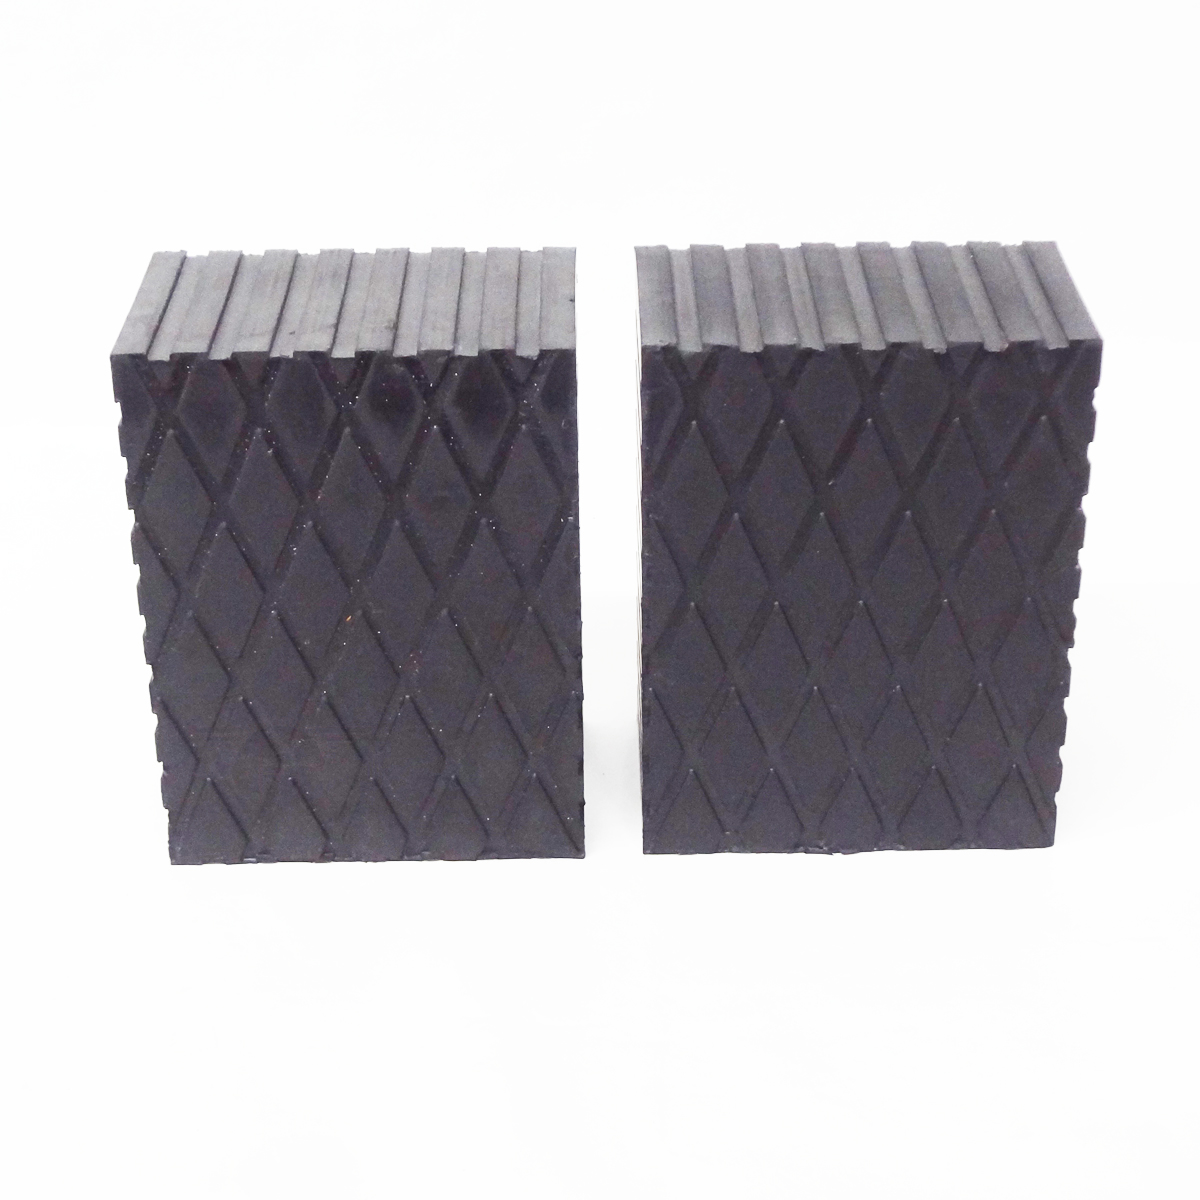 1 1/2 Tall Solid Rubber Stack Blocks (2) for Any Auto Lift or Rolling Jack